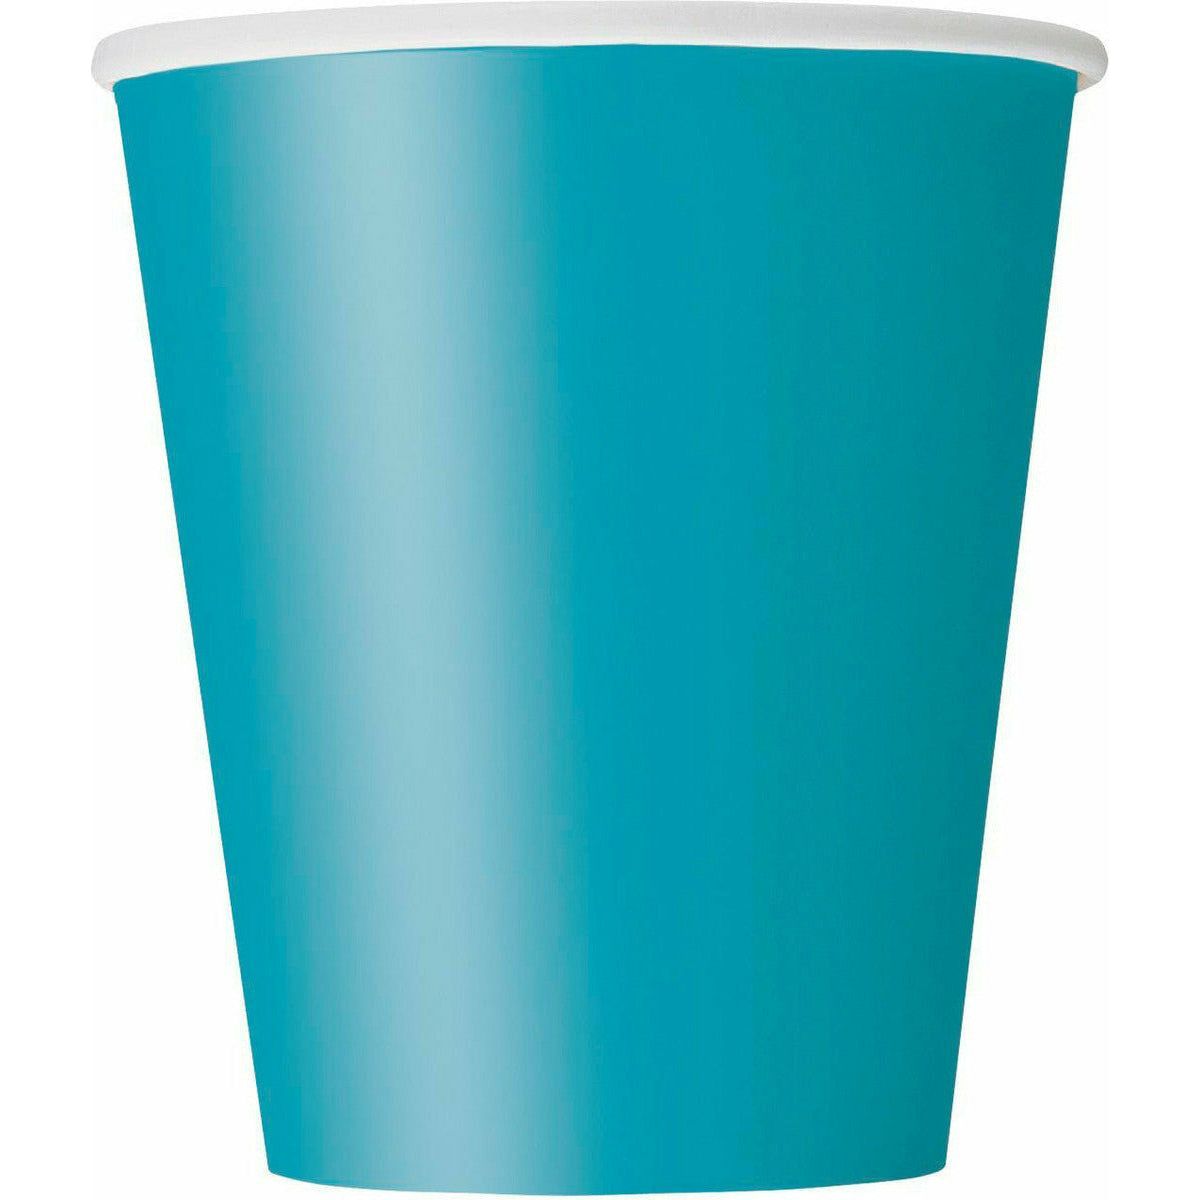 Caribbean Teal Paper Cups - 270ml 8 Pack 1 Piece - Dollars and Sense